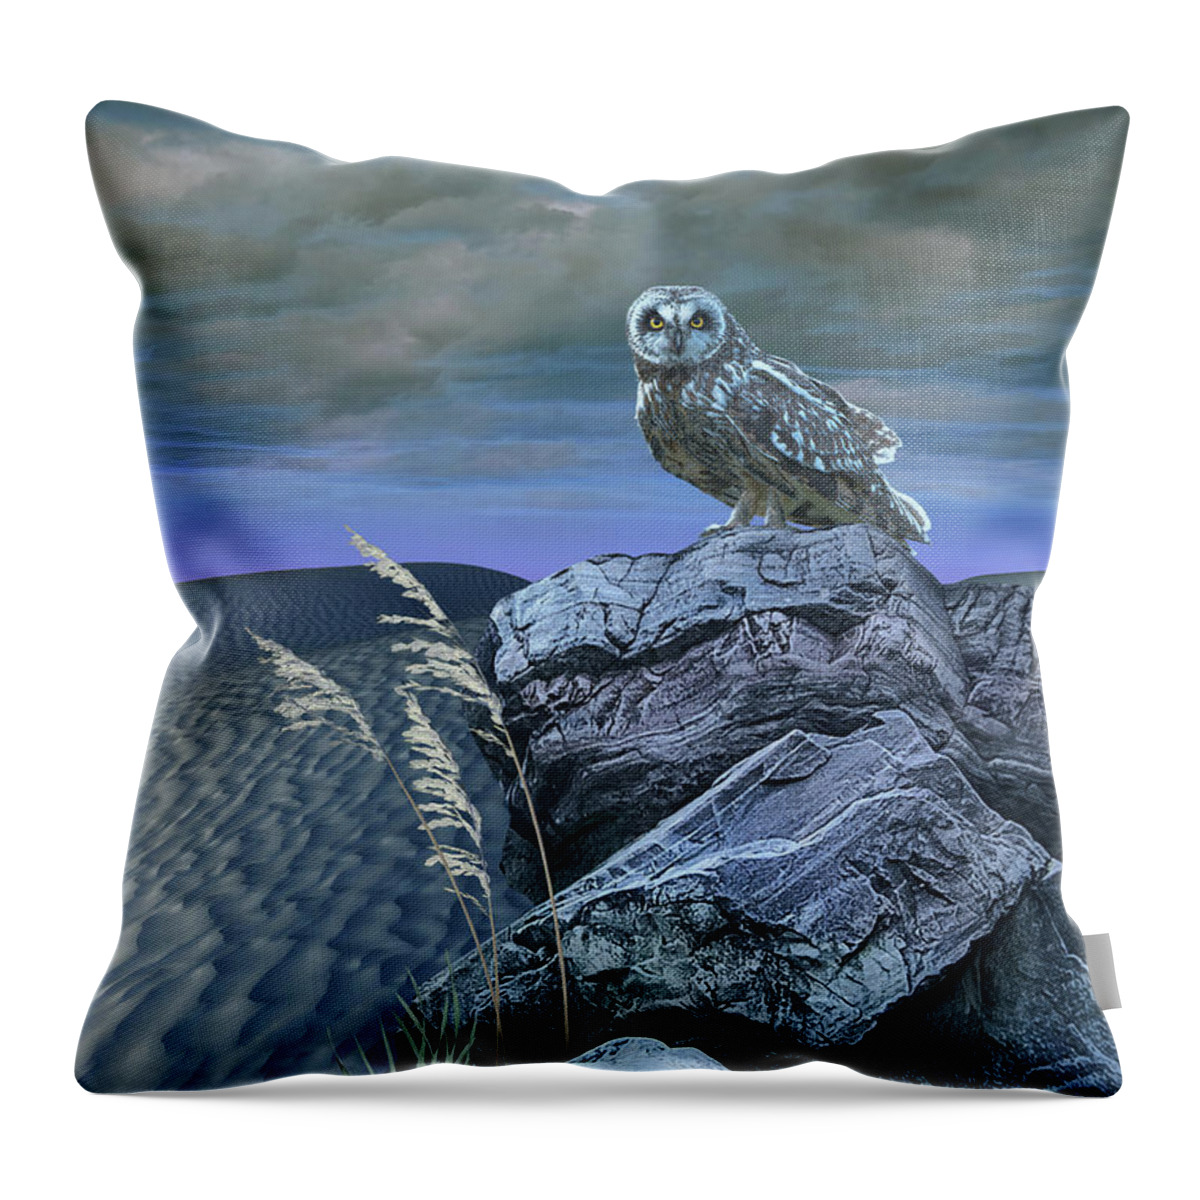 Owl Throw Pillow featuring the digital art Stalking Owl by M Spadecaller